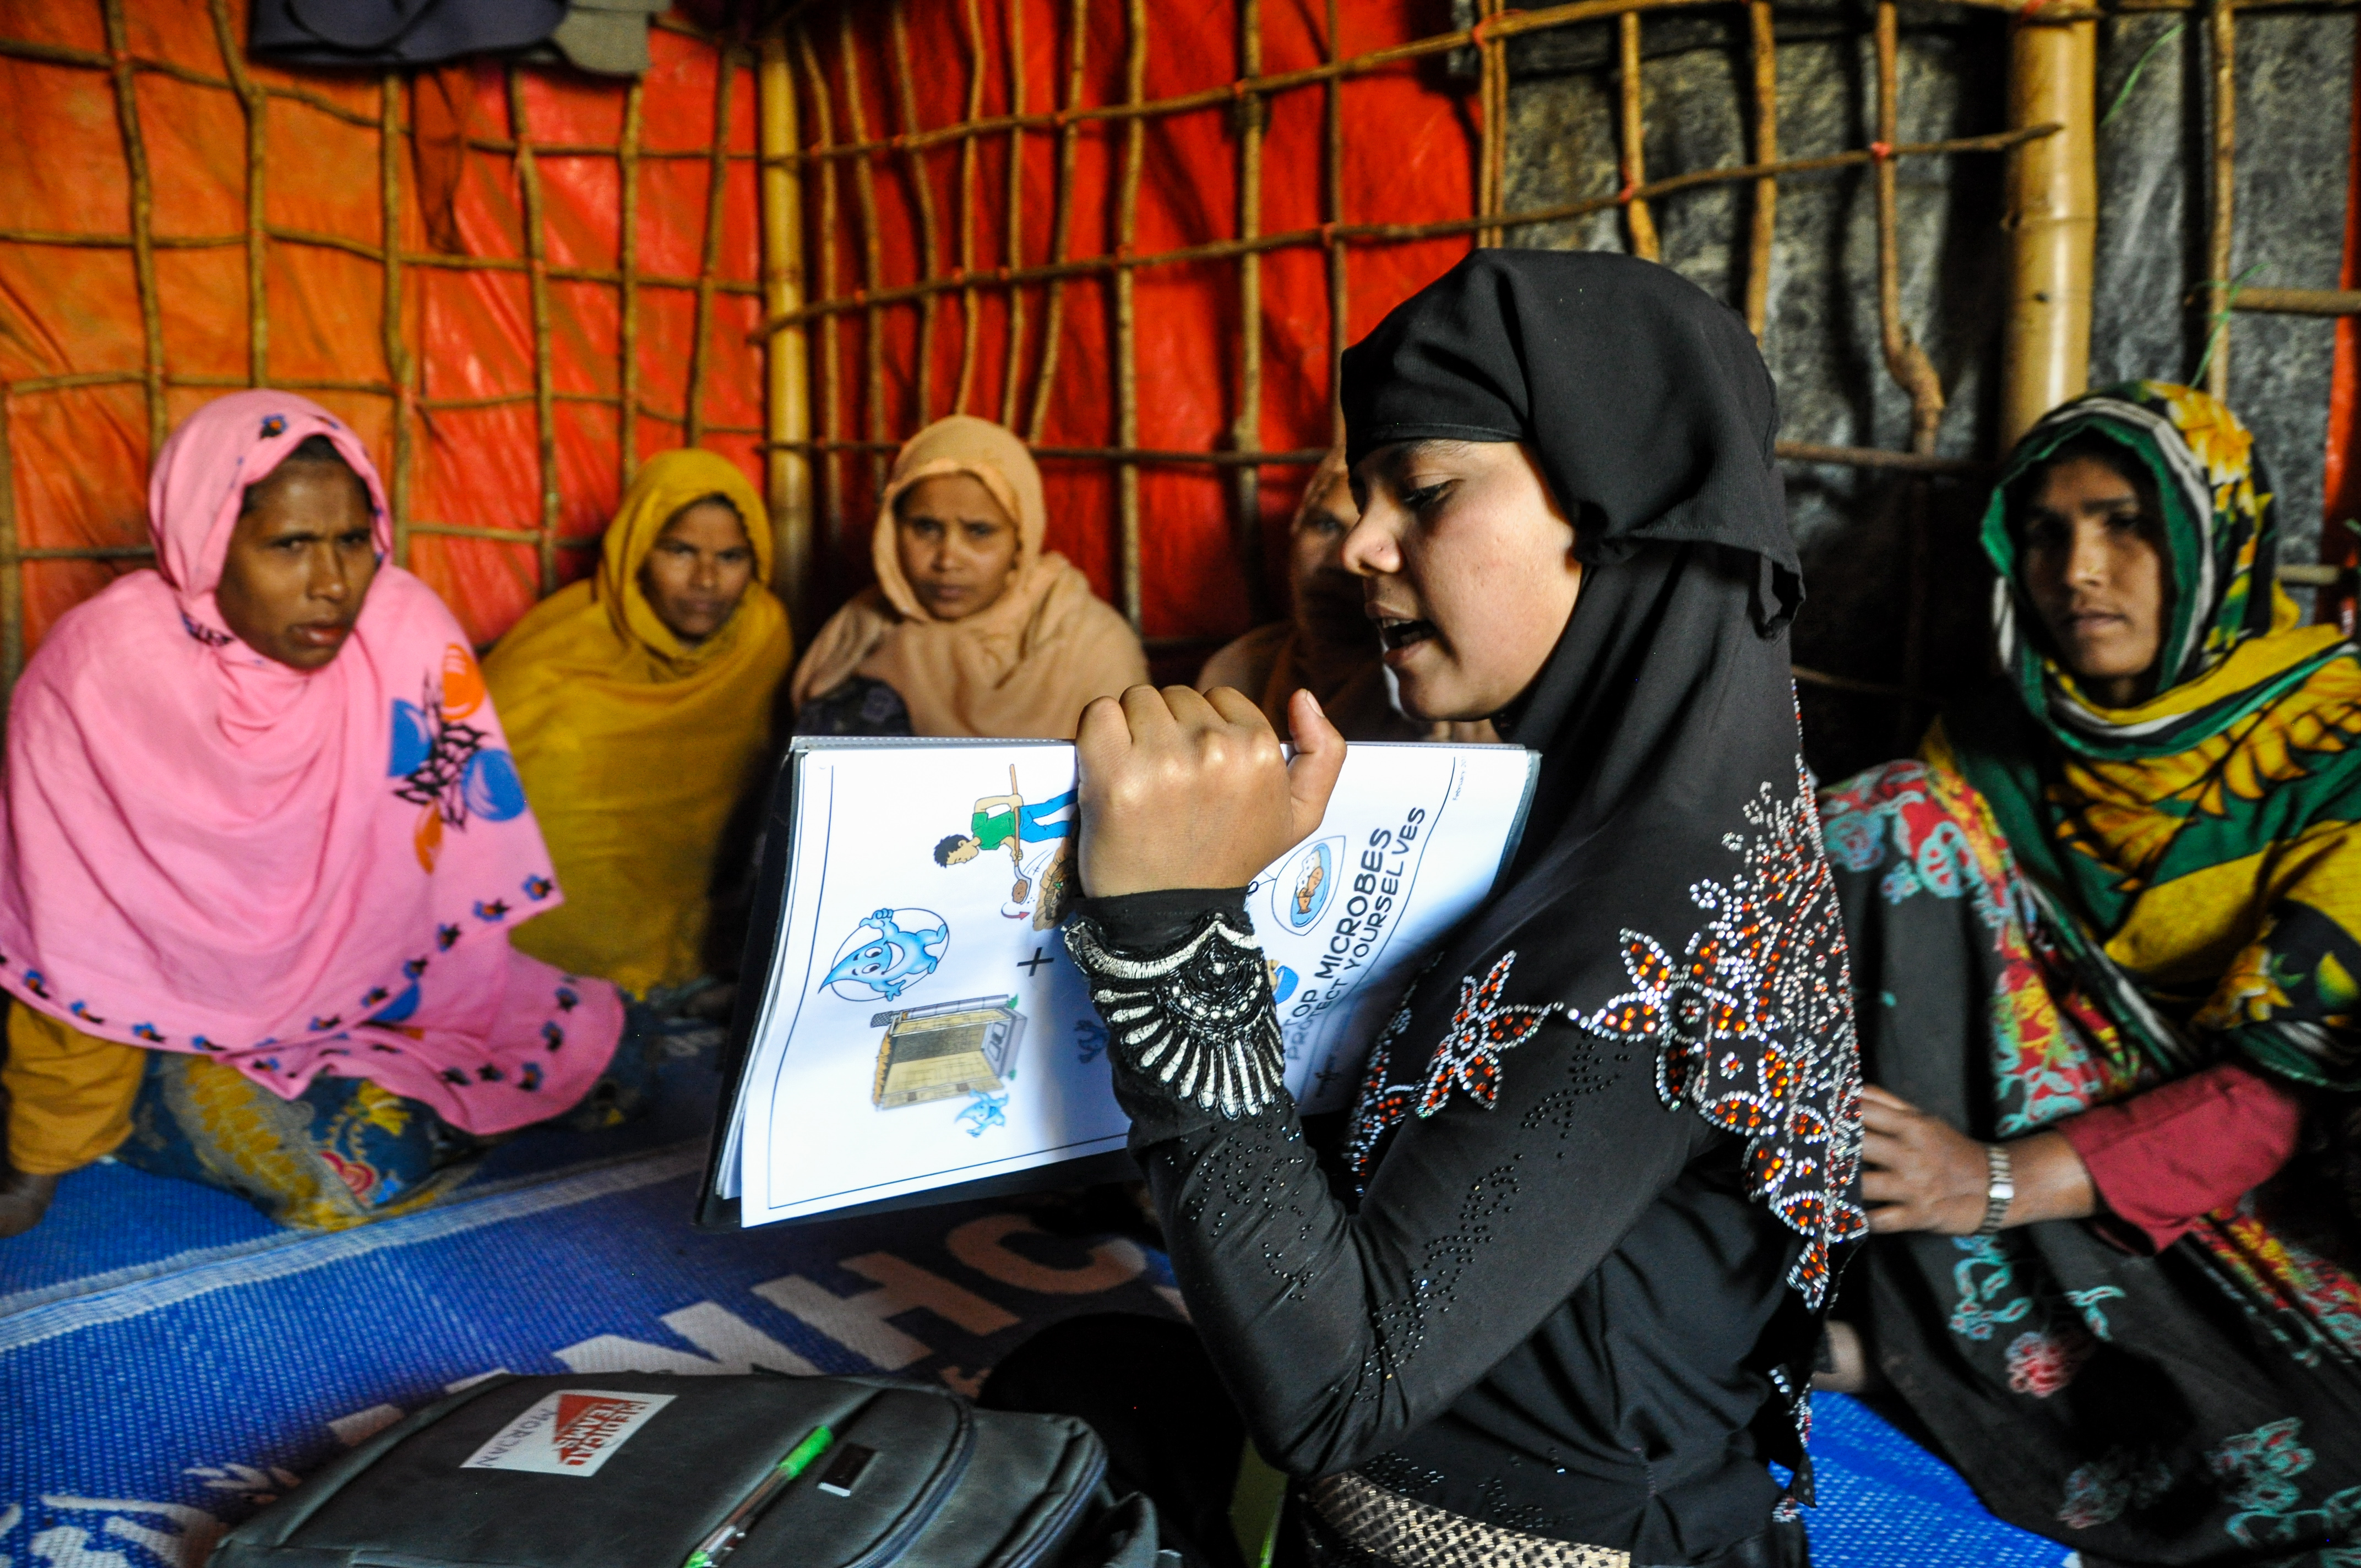 Morjan, a Rohingya refugee and Community Health Worker, shares health messages with refugee women in a camp tent